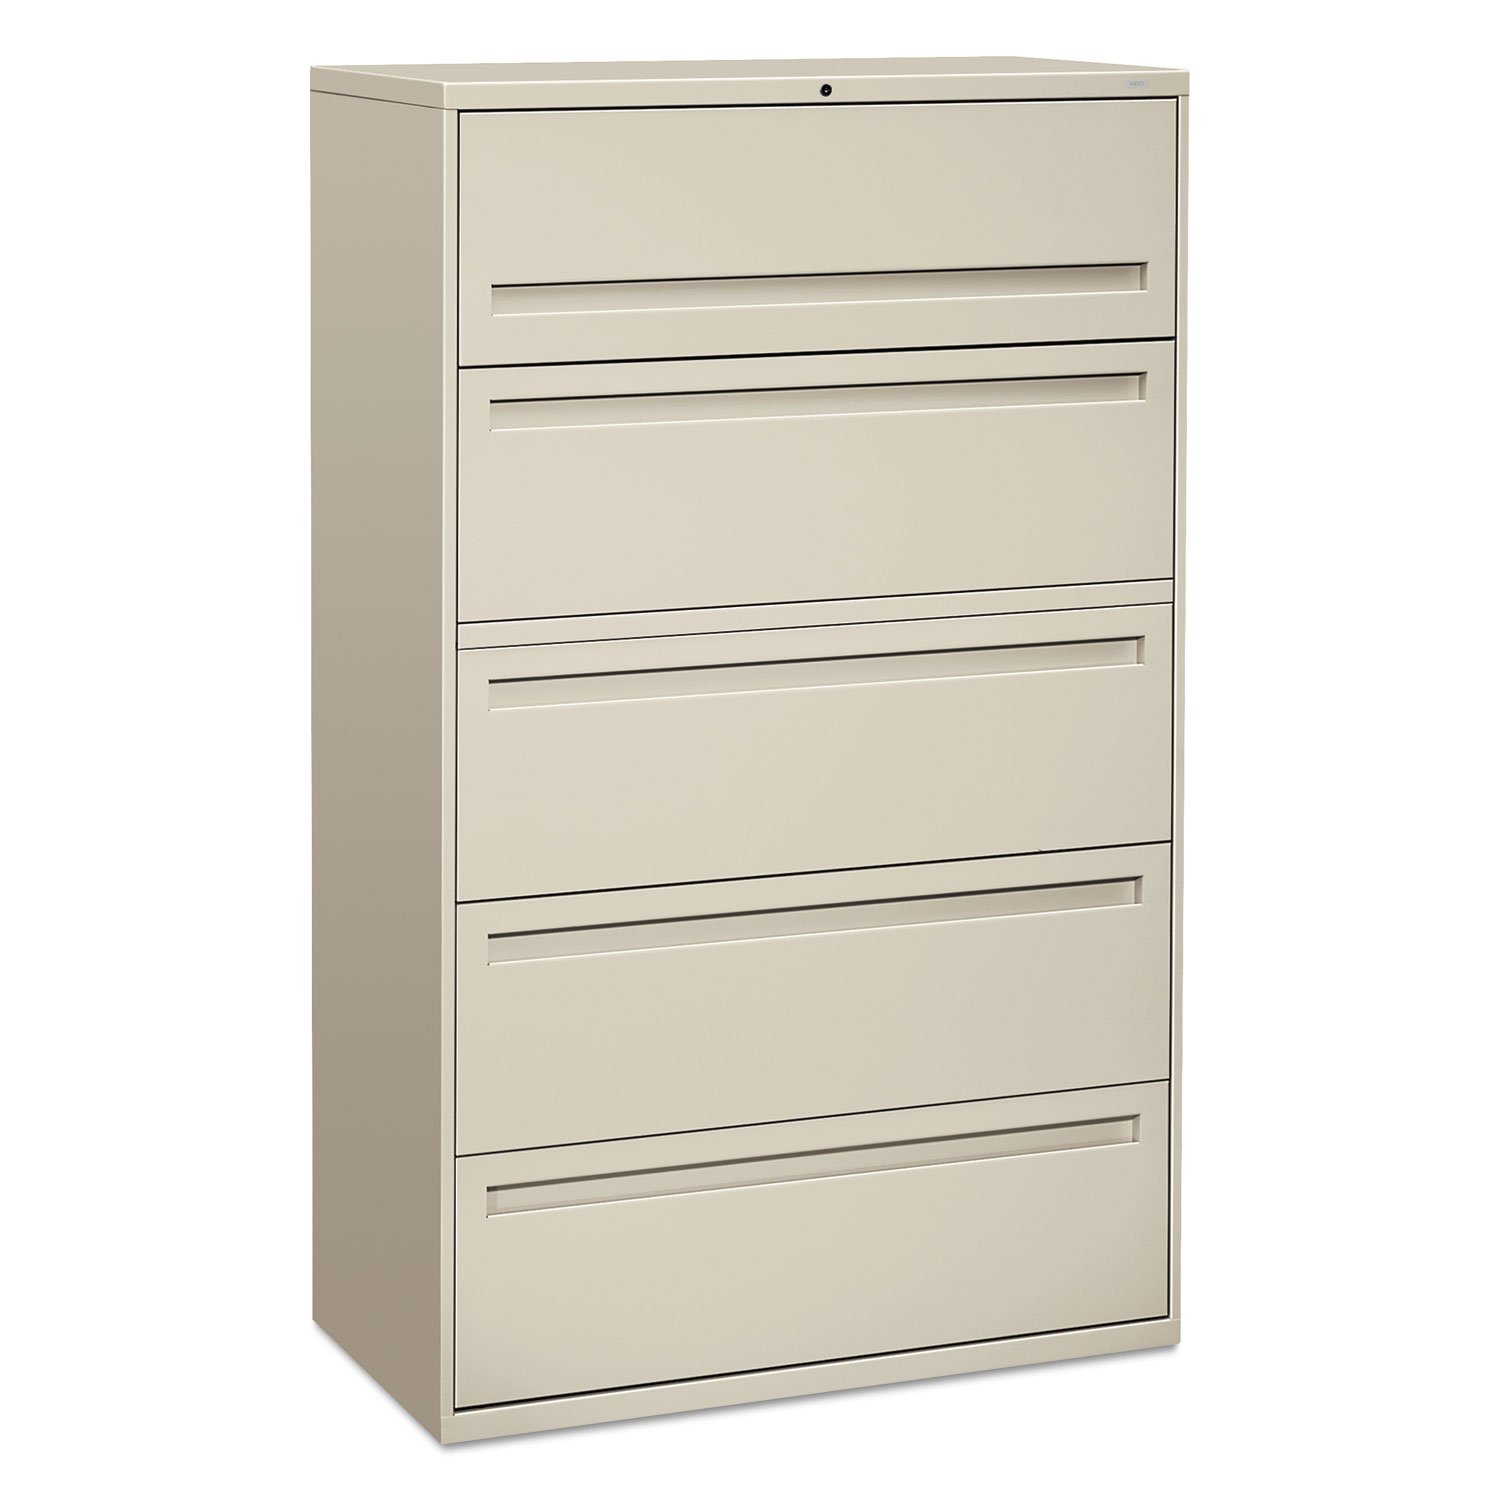 700 Series Five-Drawer Lateral File w/Roll-Out Shelves, 42w x 18d x 64 1/4h, Light Gray